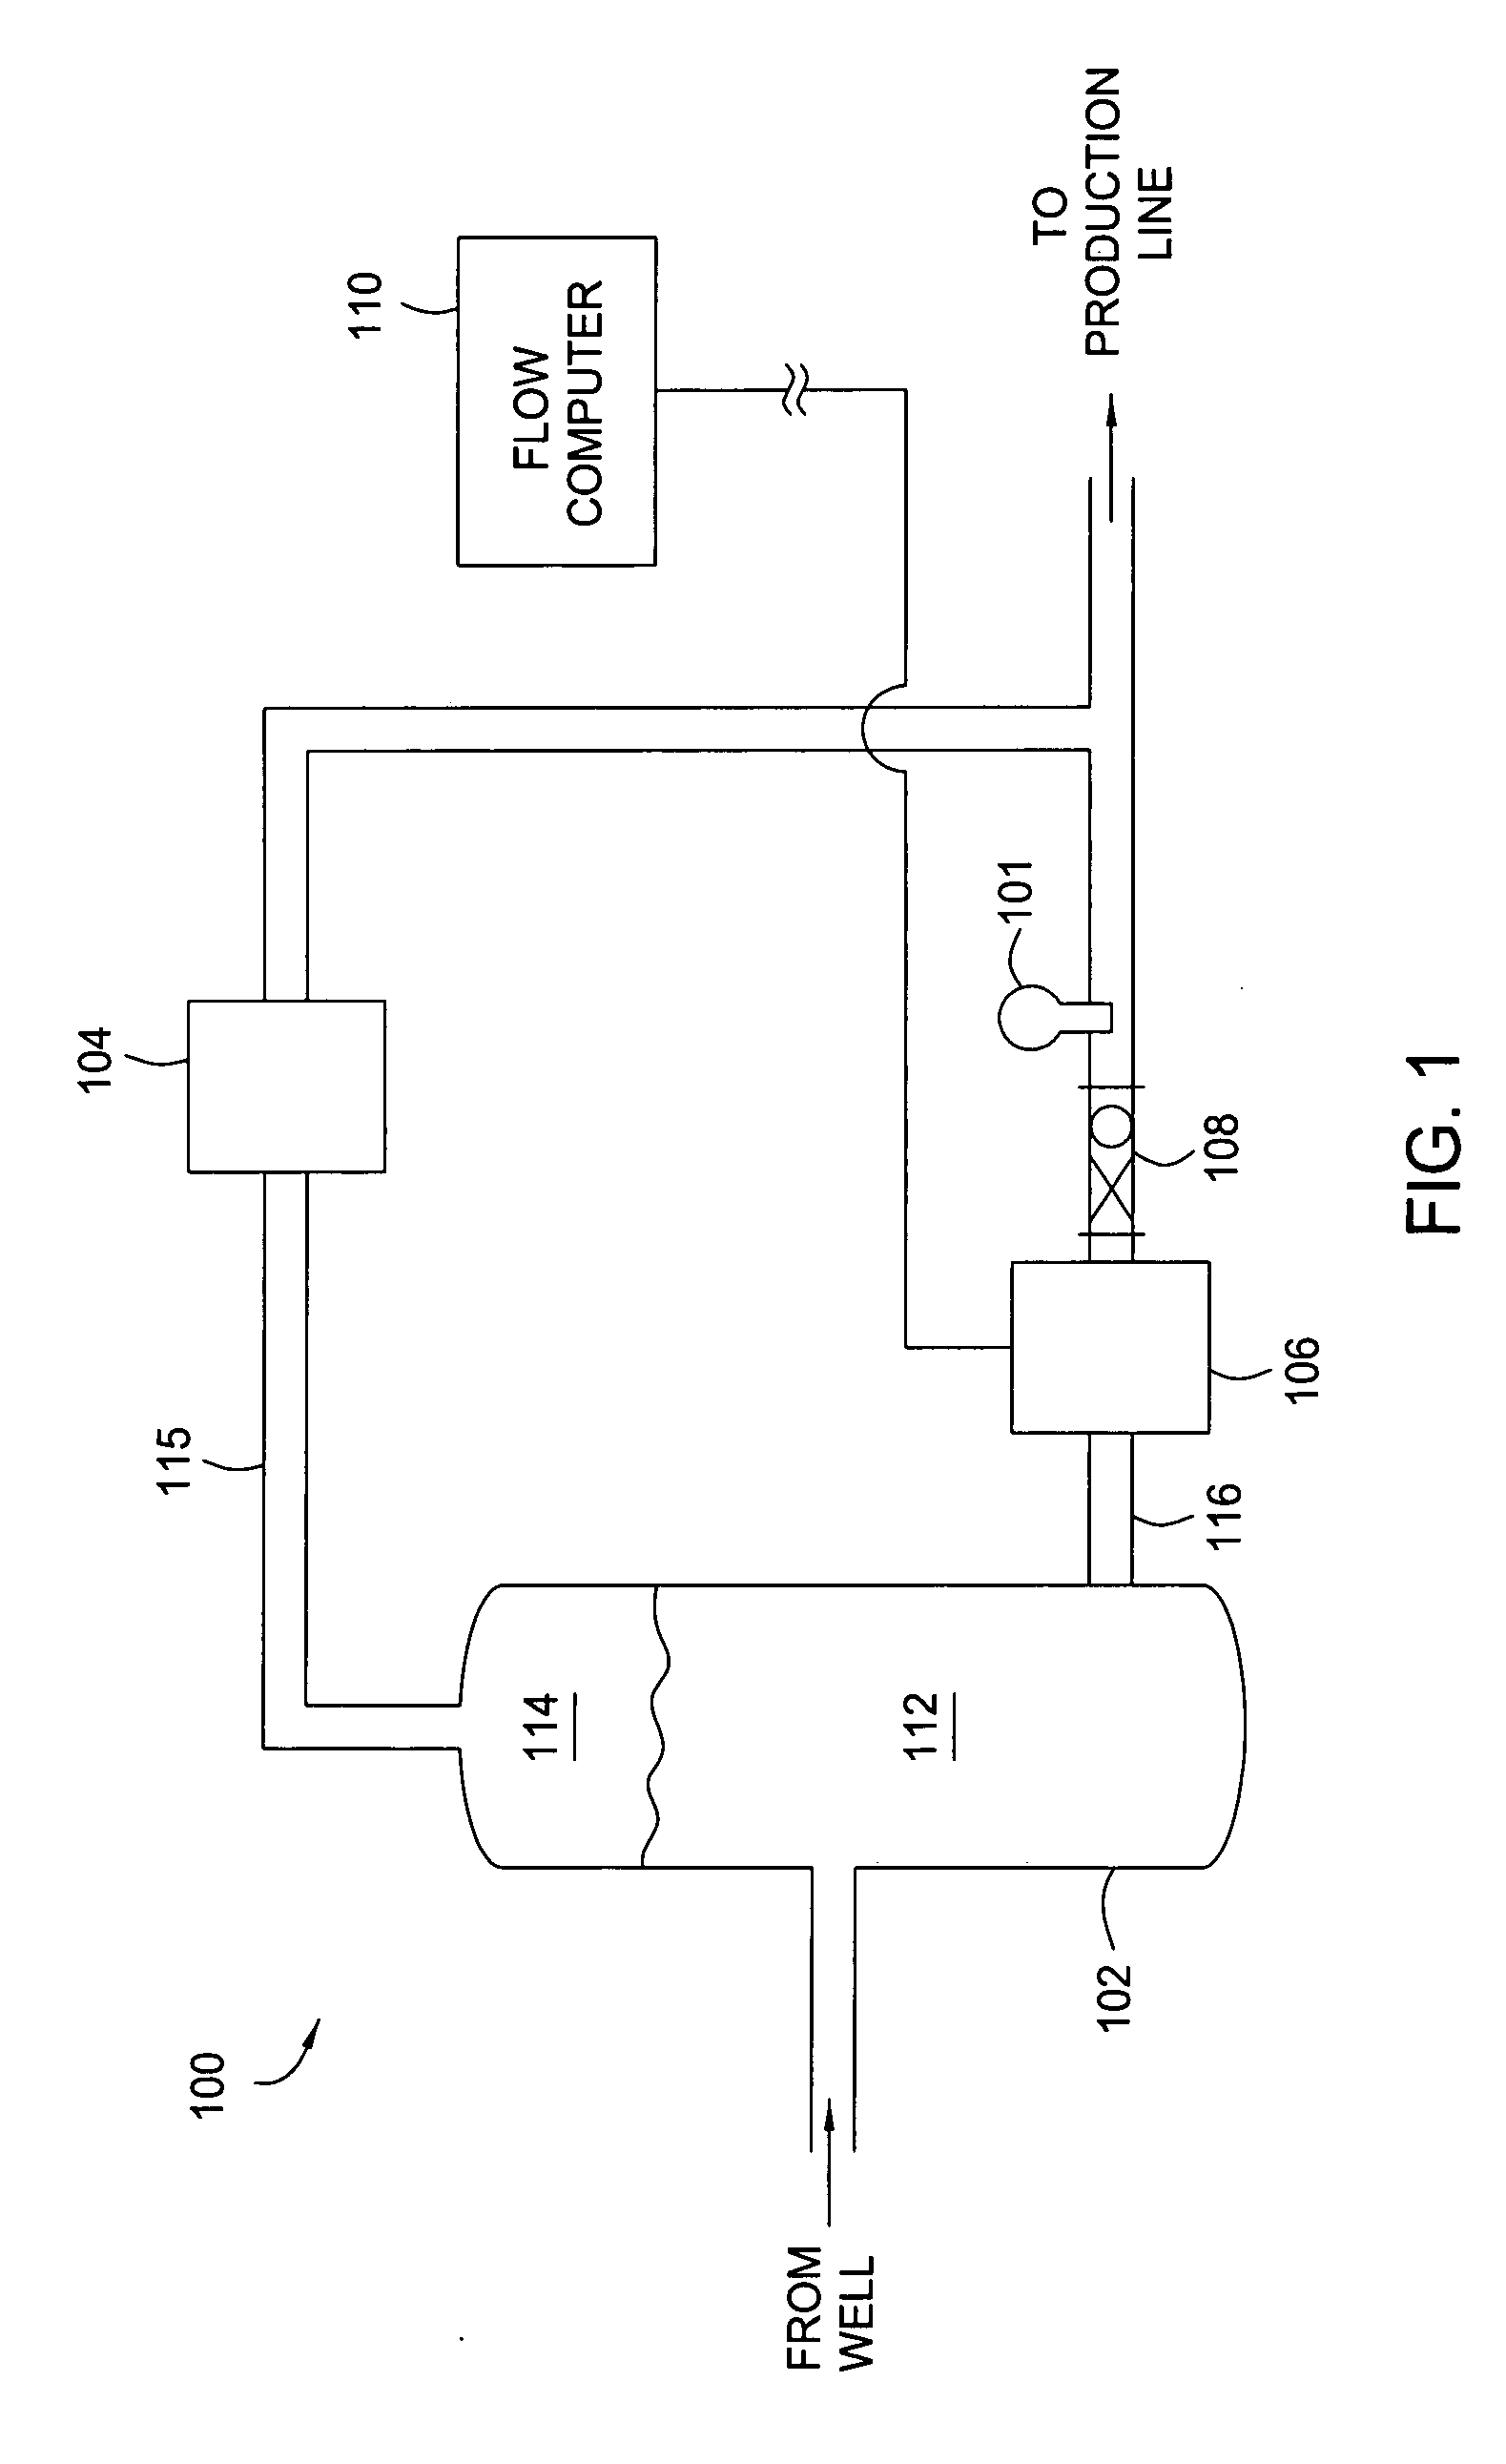 Multi-channel infrared optical phase fraction meter